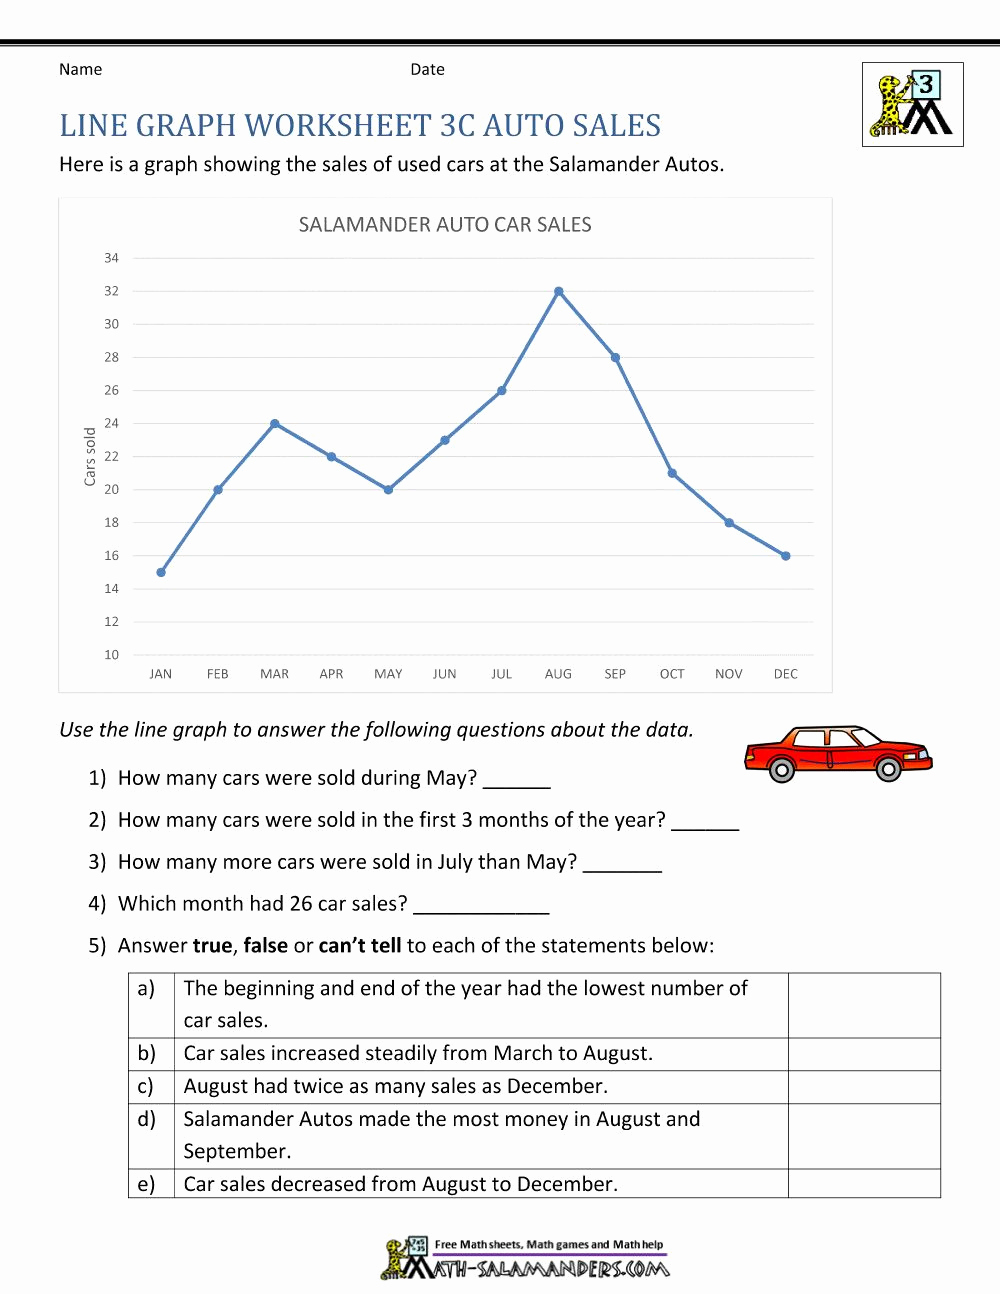 Line Graph Worksheet 5th Grade Awesome Line Graph Worksheets 5th Grade In 2020